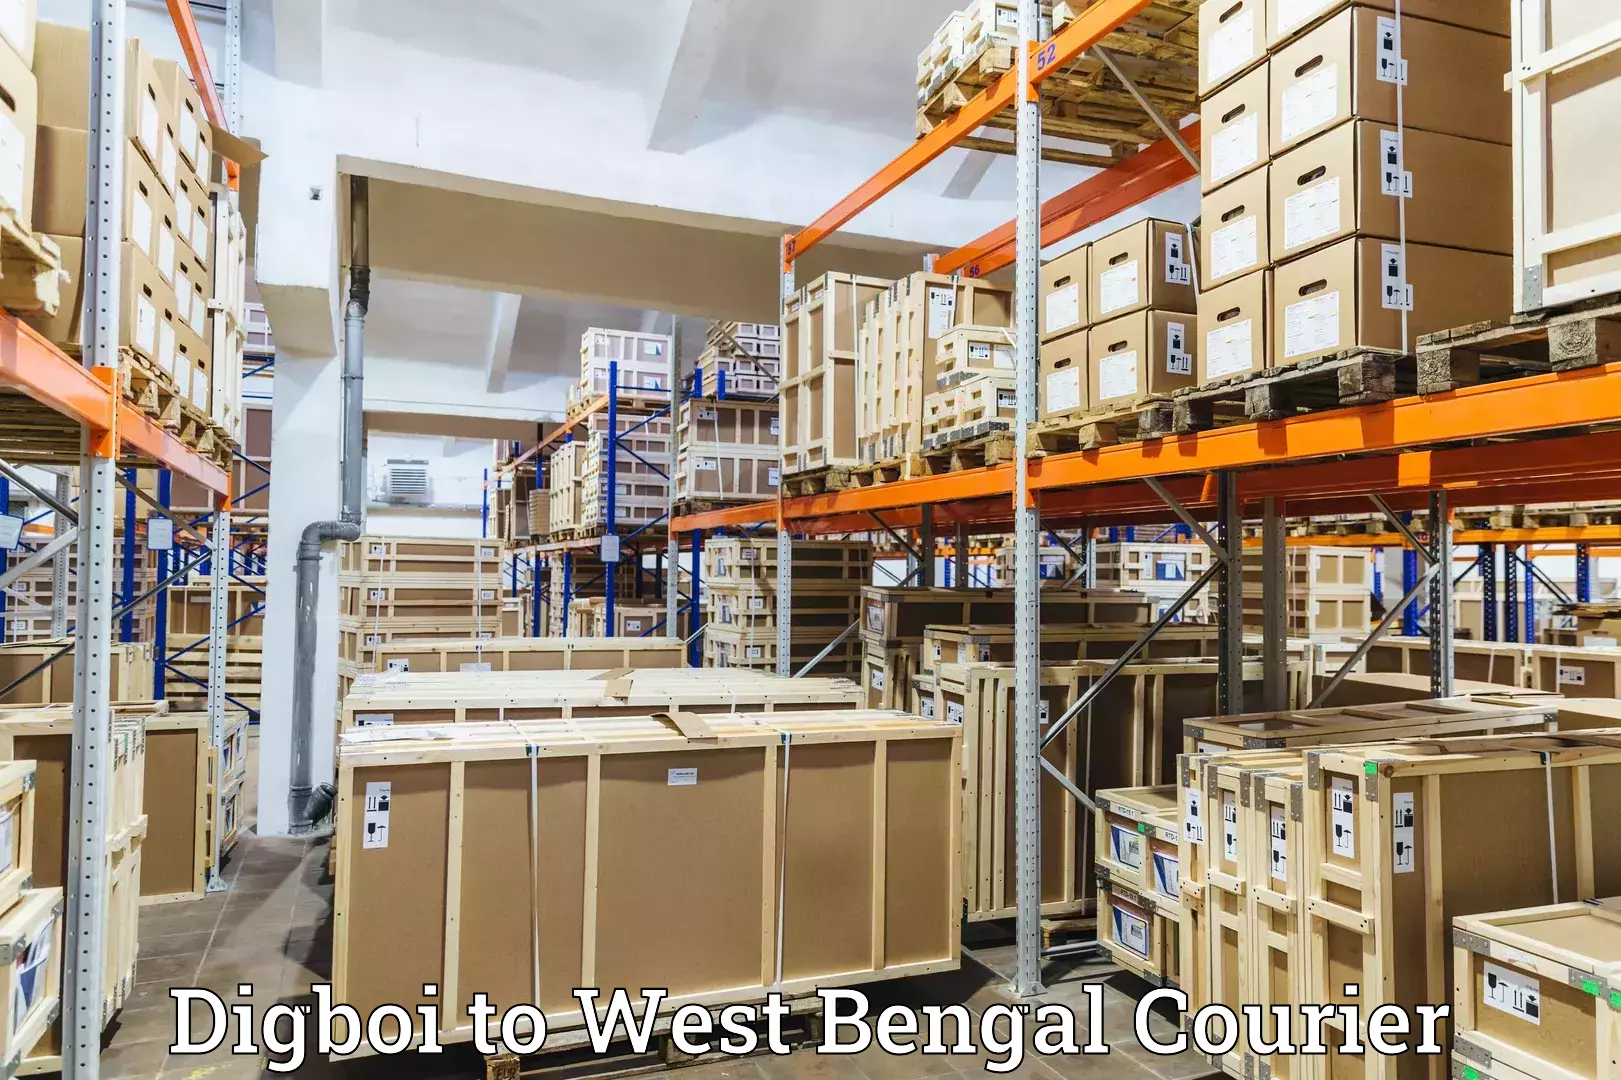 Fast delivery service Digboi to Budge Budge